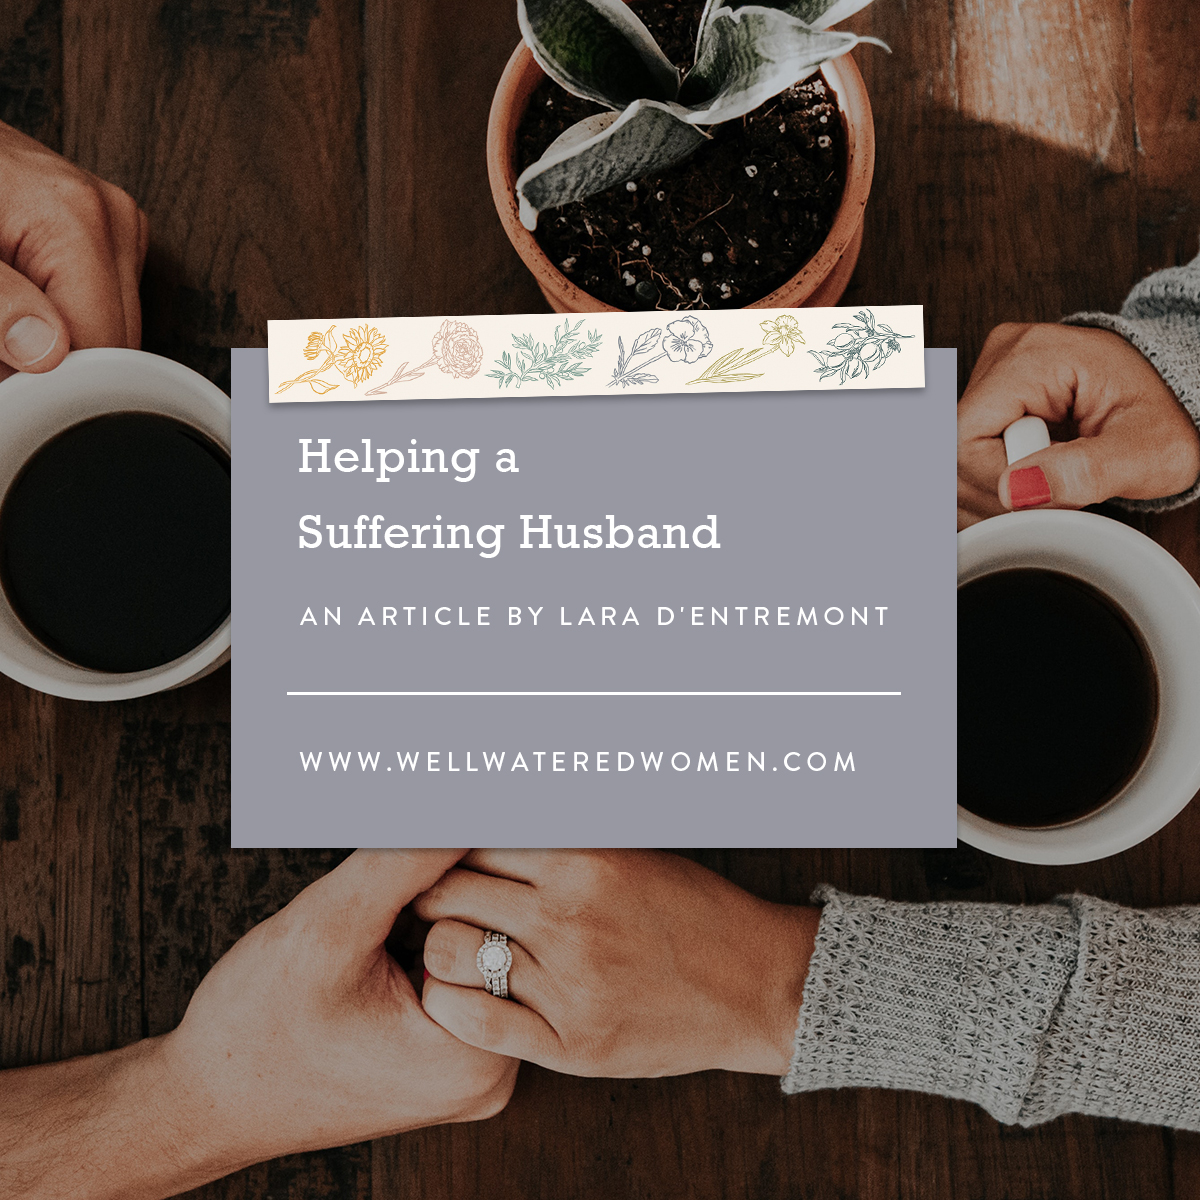 Helping a Suffering Husband - an Article from Well-Watered Women